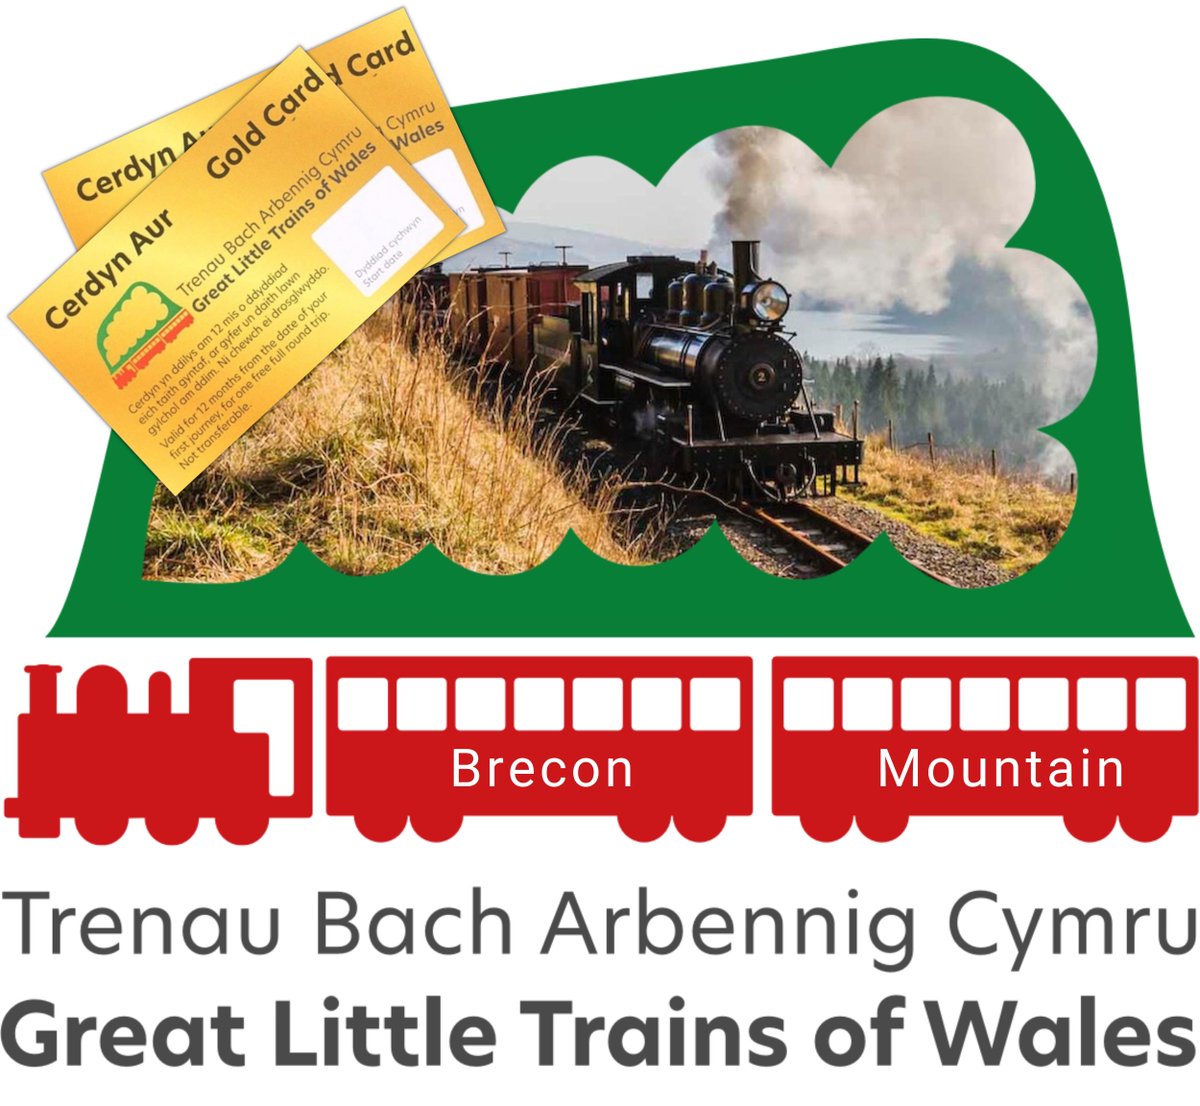 🎟️ All Gold Cards are now on offer! 🚂 11 member railways have come together to offer a significant discount on the total std return fares 🔗 loom.ly/oE8uHOs 📸 @BreconMRailway #Llwybrau #WalesByTrails #narrowgauge #heritagerail #wales #23off2023